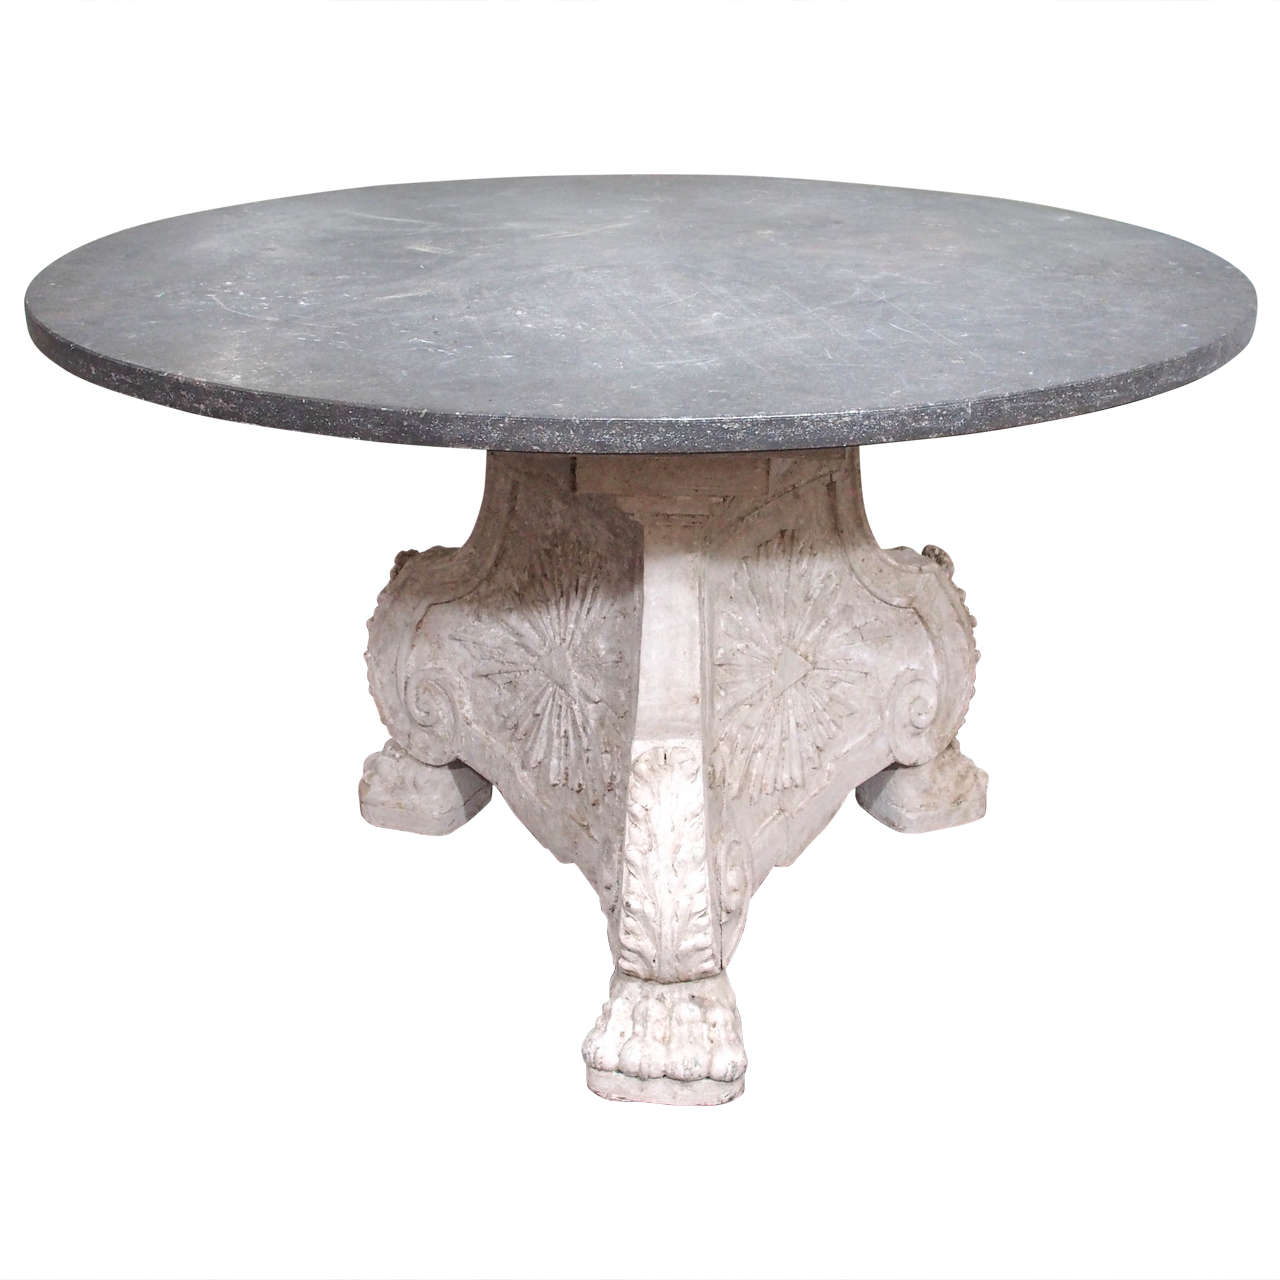 19th Century Carved and Painted Italian Blue Stone Center Table